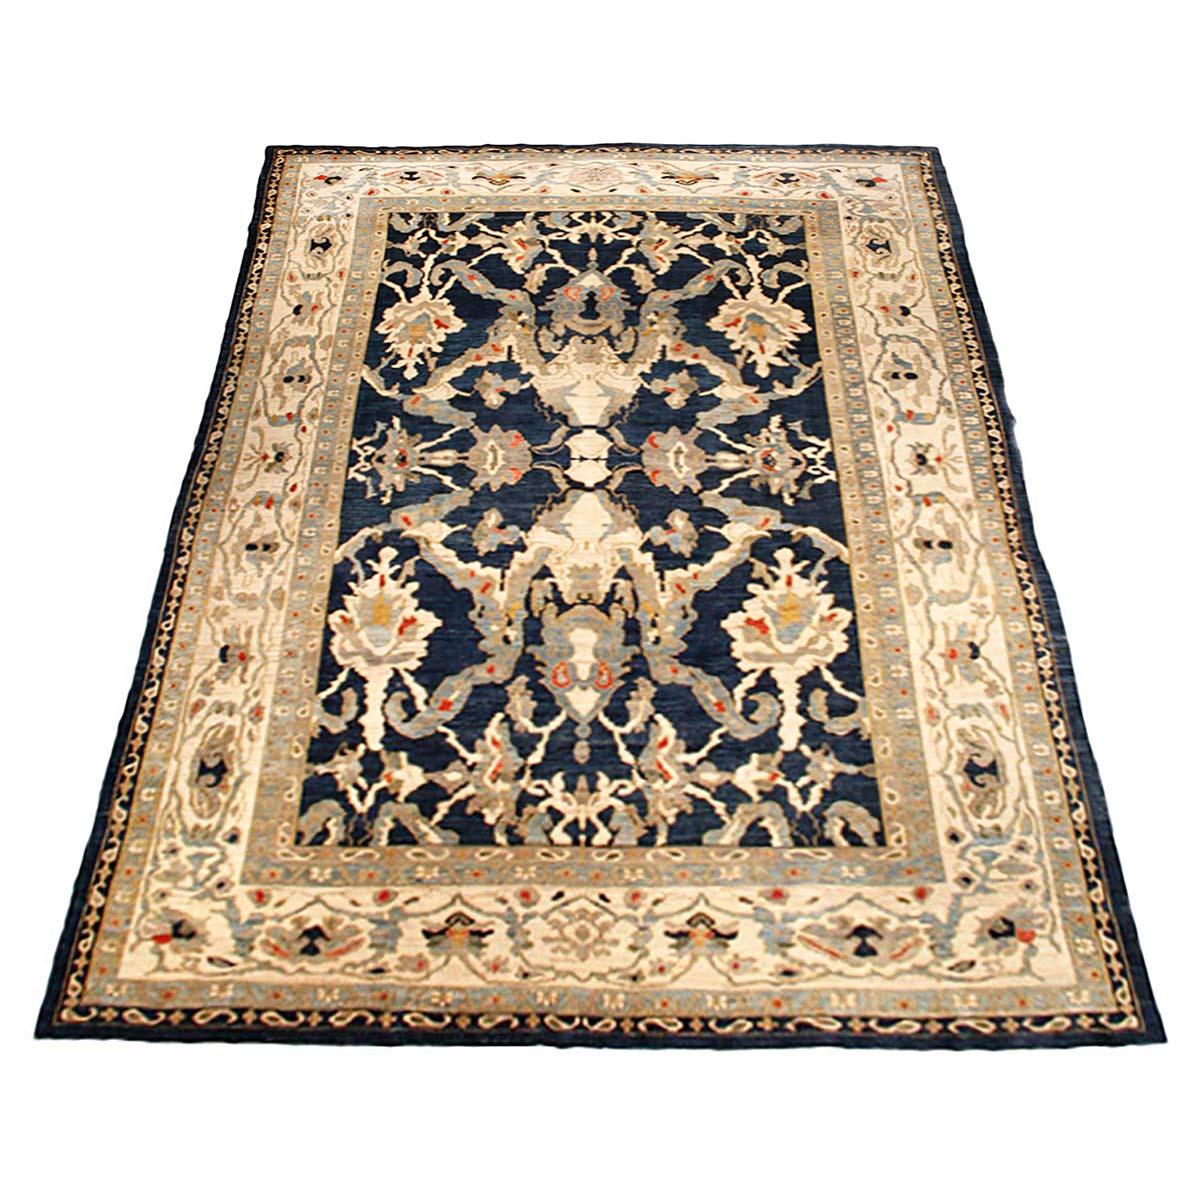 Ashly Fine Rugs presents an antique recreation of an original Persian Sultanabad 12x16 Navy Blue & Ivory Handmade Area Rug. Part of our own previous production, this antique recreation was thought of and created in-house and 100% handmade in Iran by